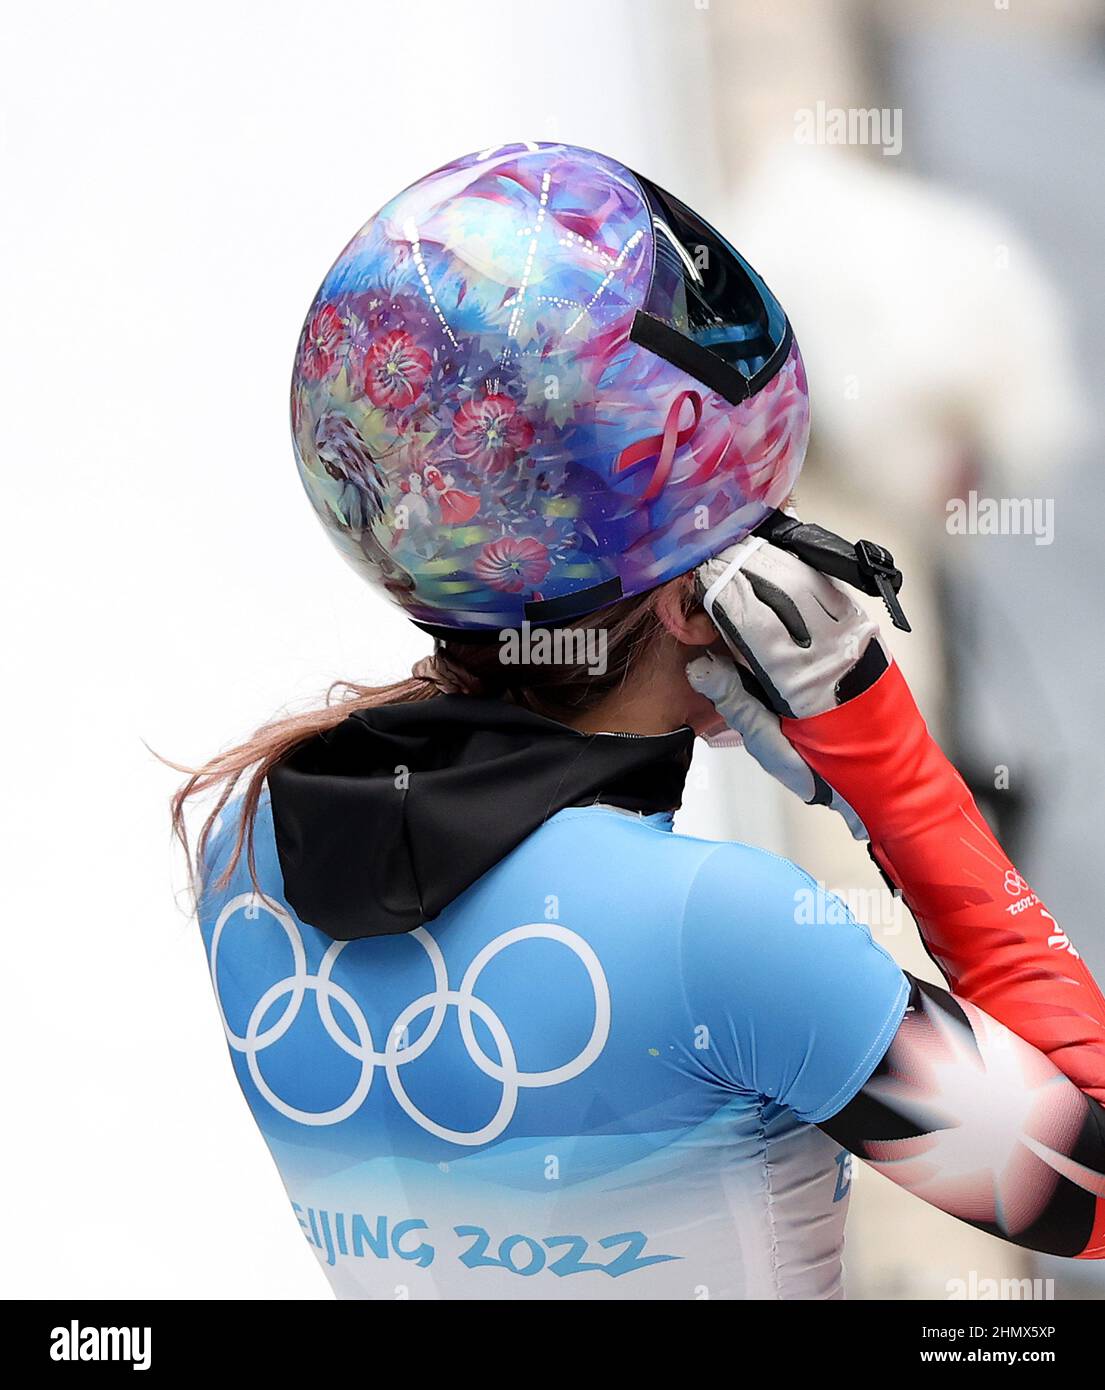 Beijing, China. 12th Feb, 2022. Mirela Rahneva of Canada competes during the skeleton women heat of Beijing 2022 Winter Olympics at National Sliding Centre in Yanqing District, Beijing, capital of China, Feb. 12, 2022. Credit: Yao Jianfeng/Xinhua/Alamy Live News Stock Photo